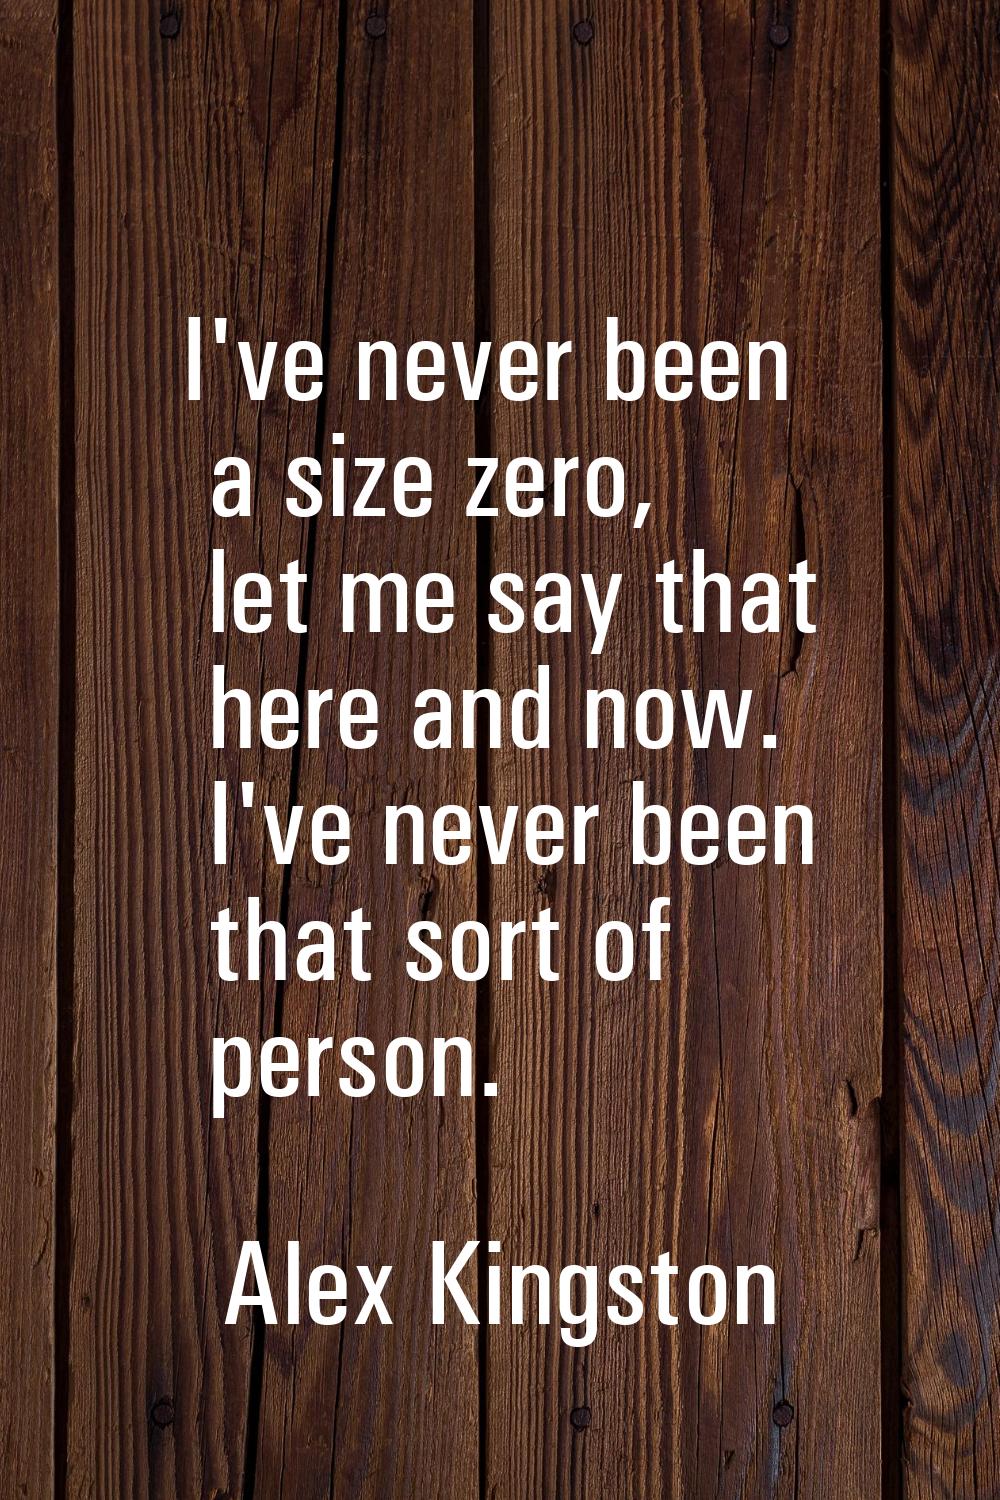 I've never been a size zero, let me say that here and now. I've never been that sort of person.